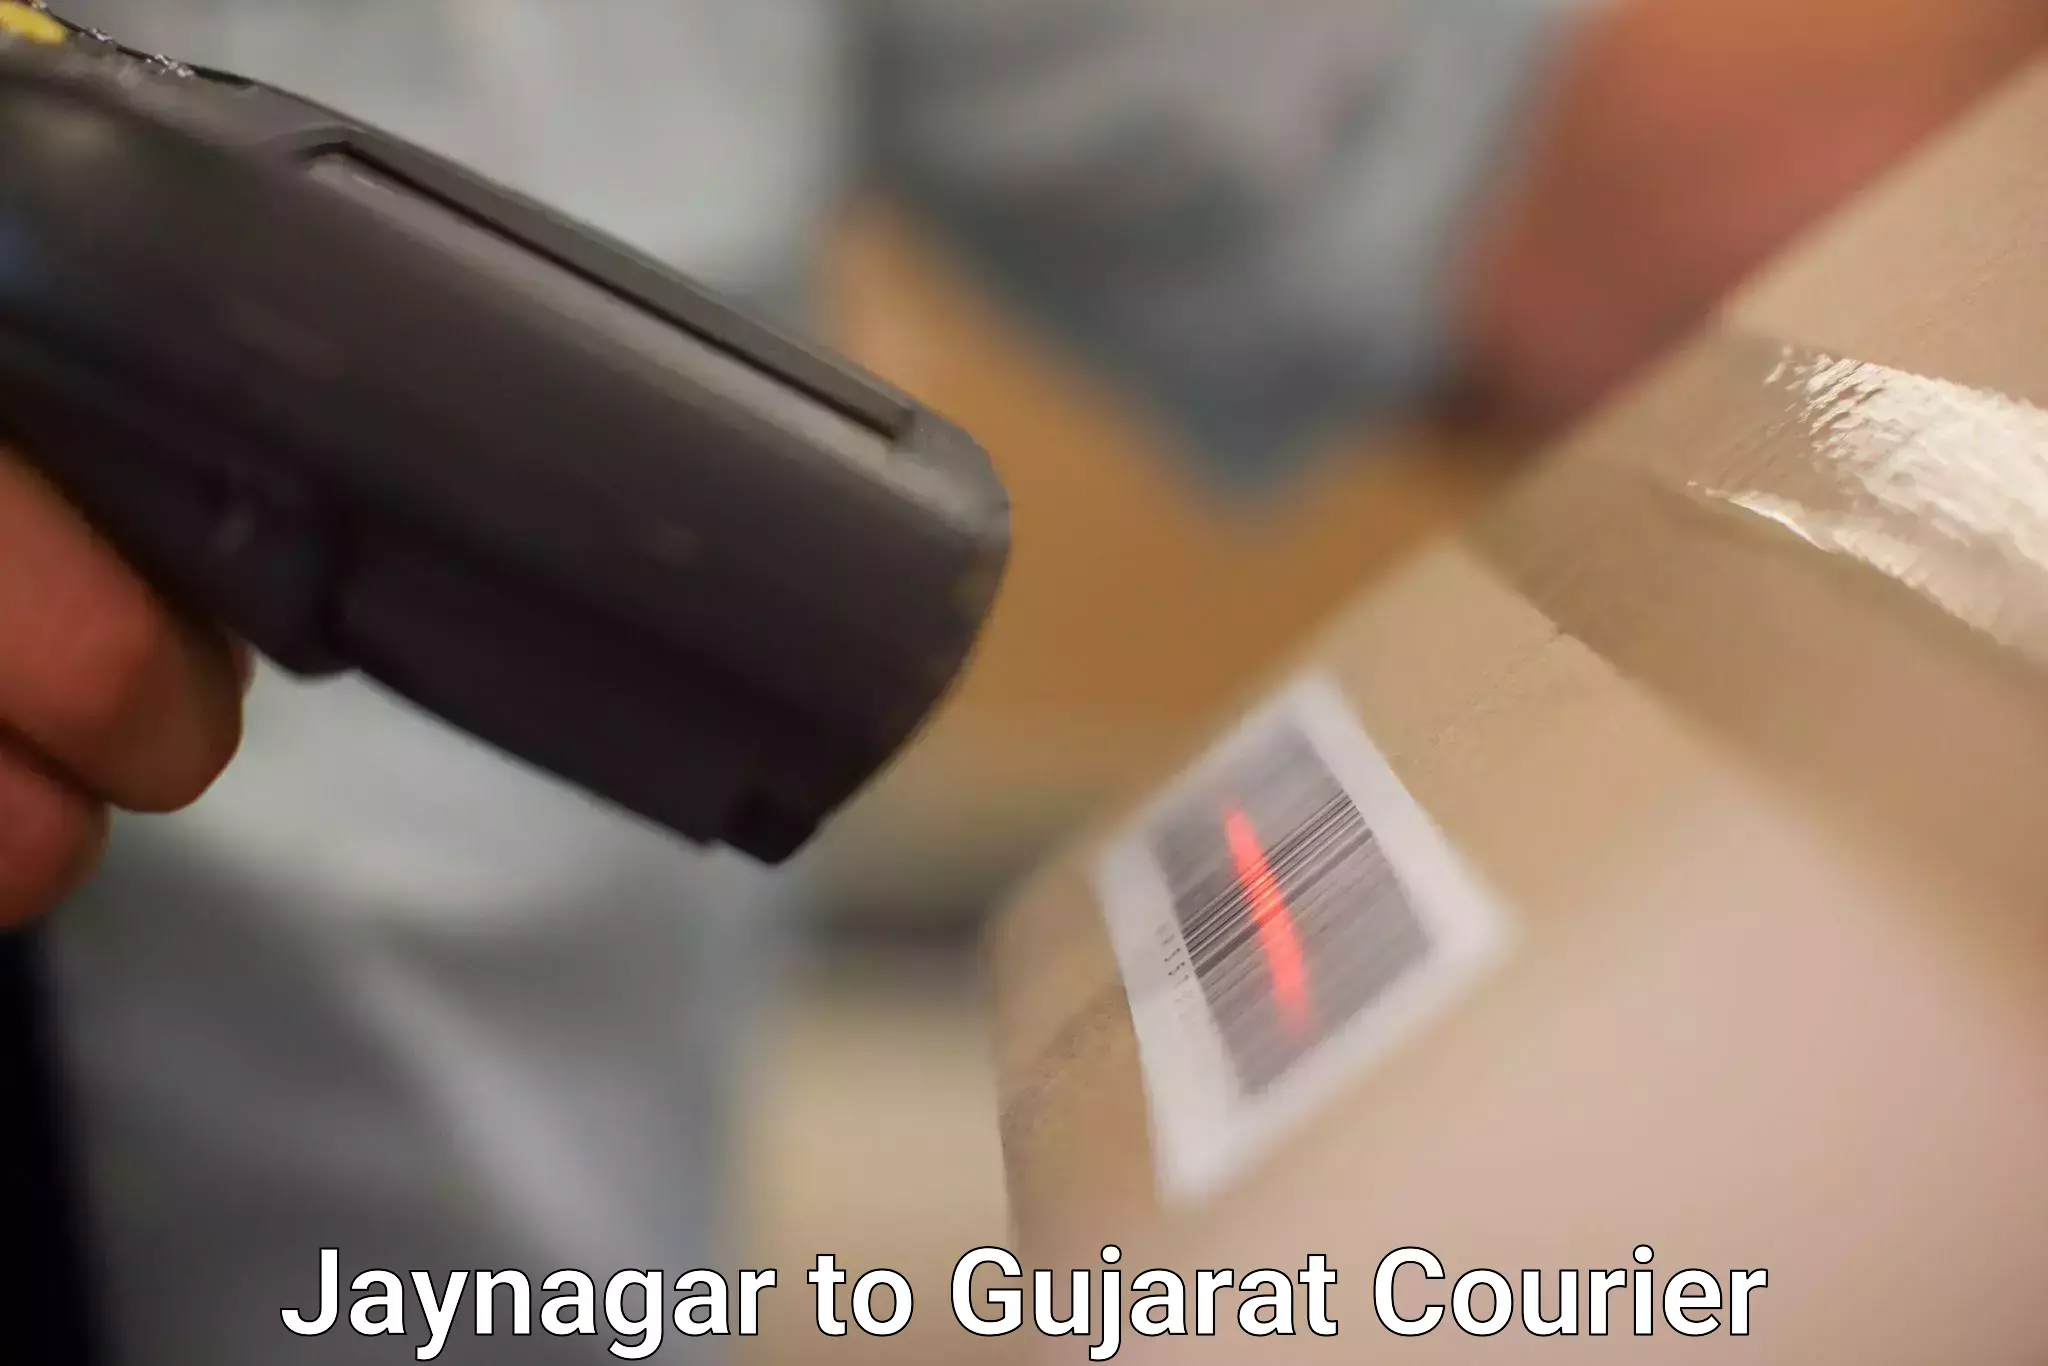 Multi-national courier services Jaynagar to Songadh